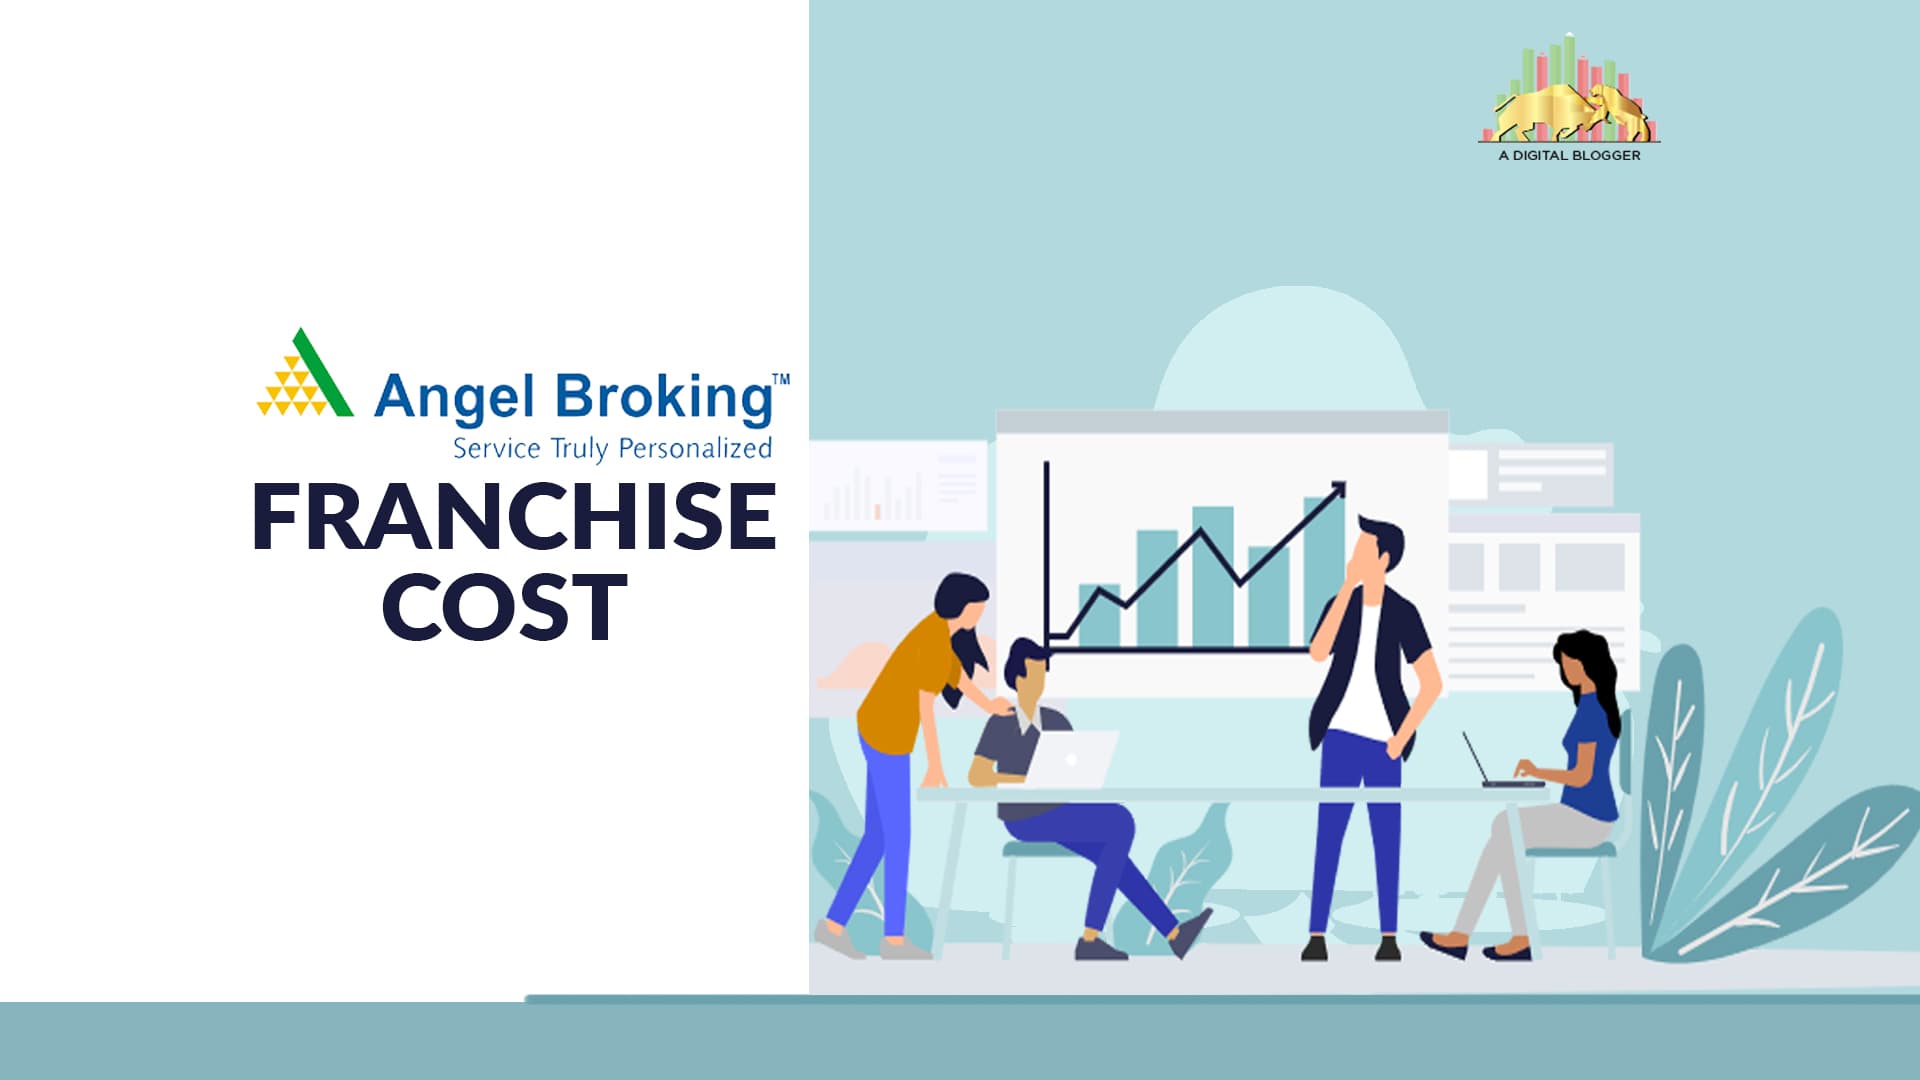 What Is The Angel Broking Franchise Cost In India?